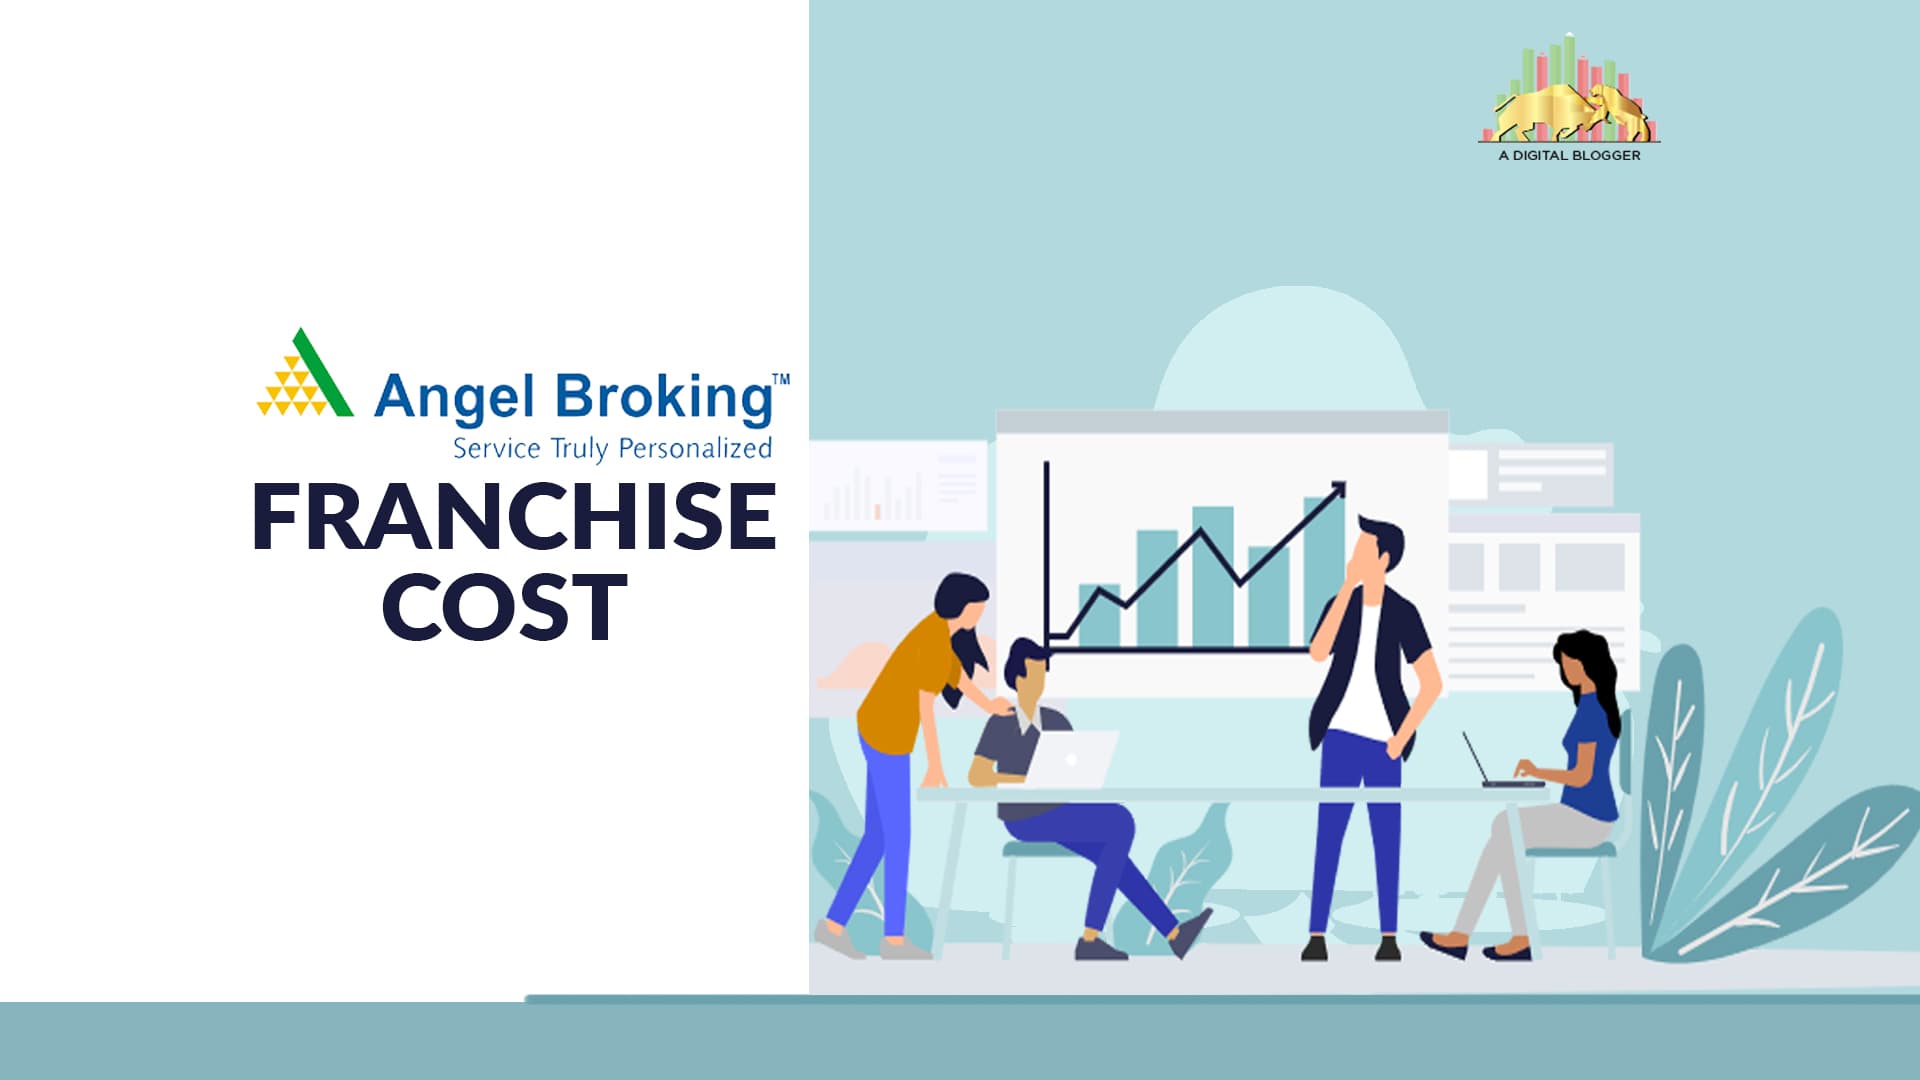 What Is The Angel Broking Franchise Cost In India?